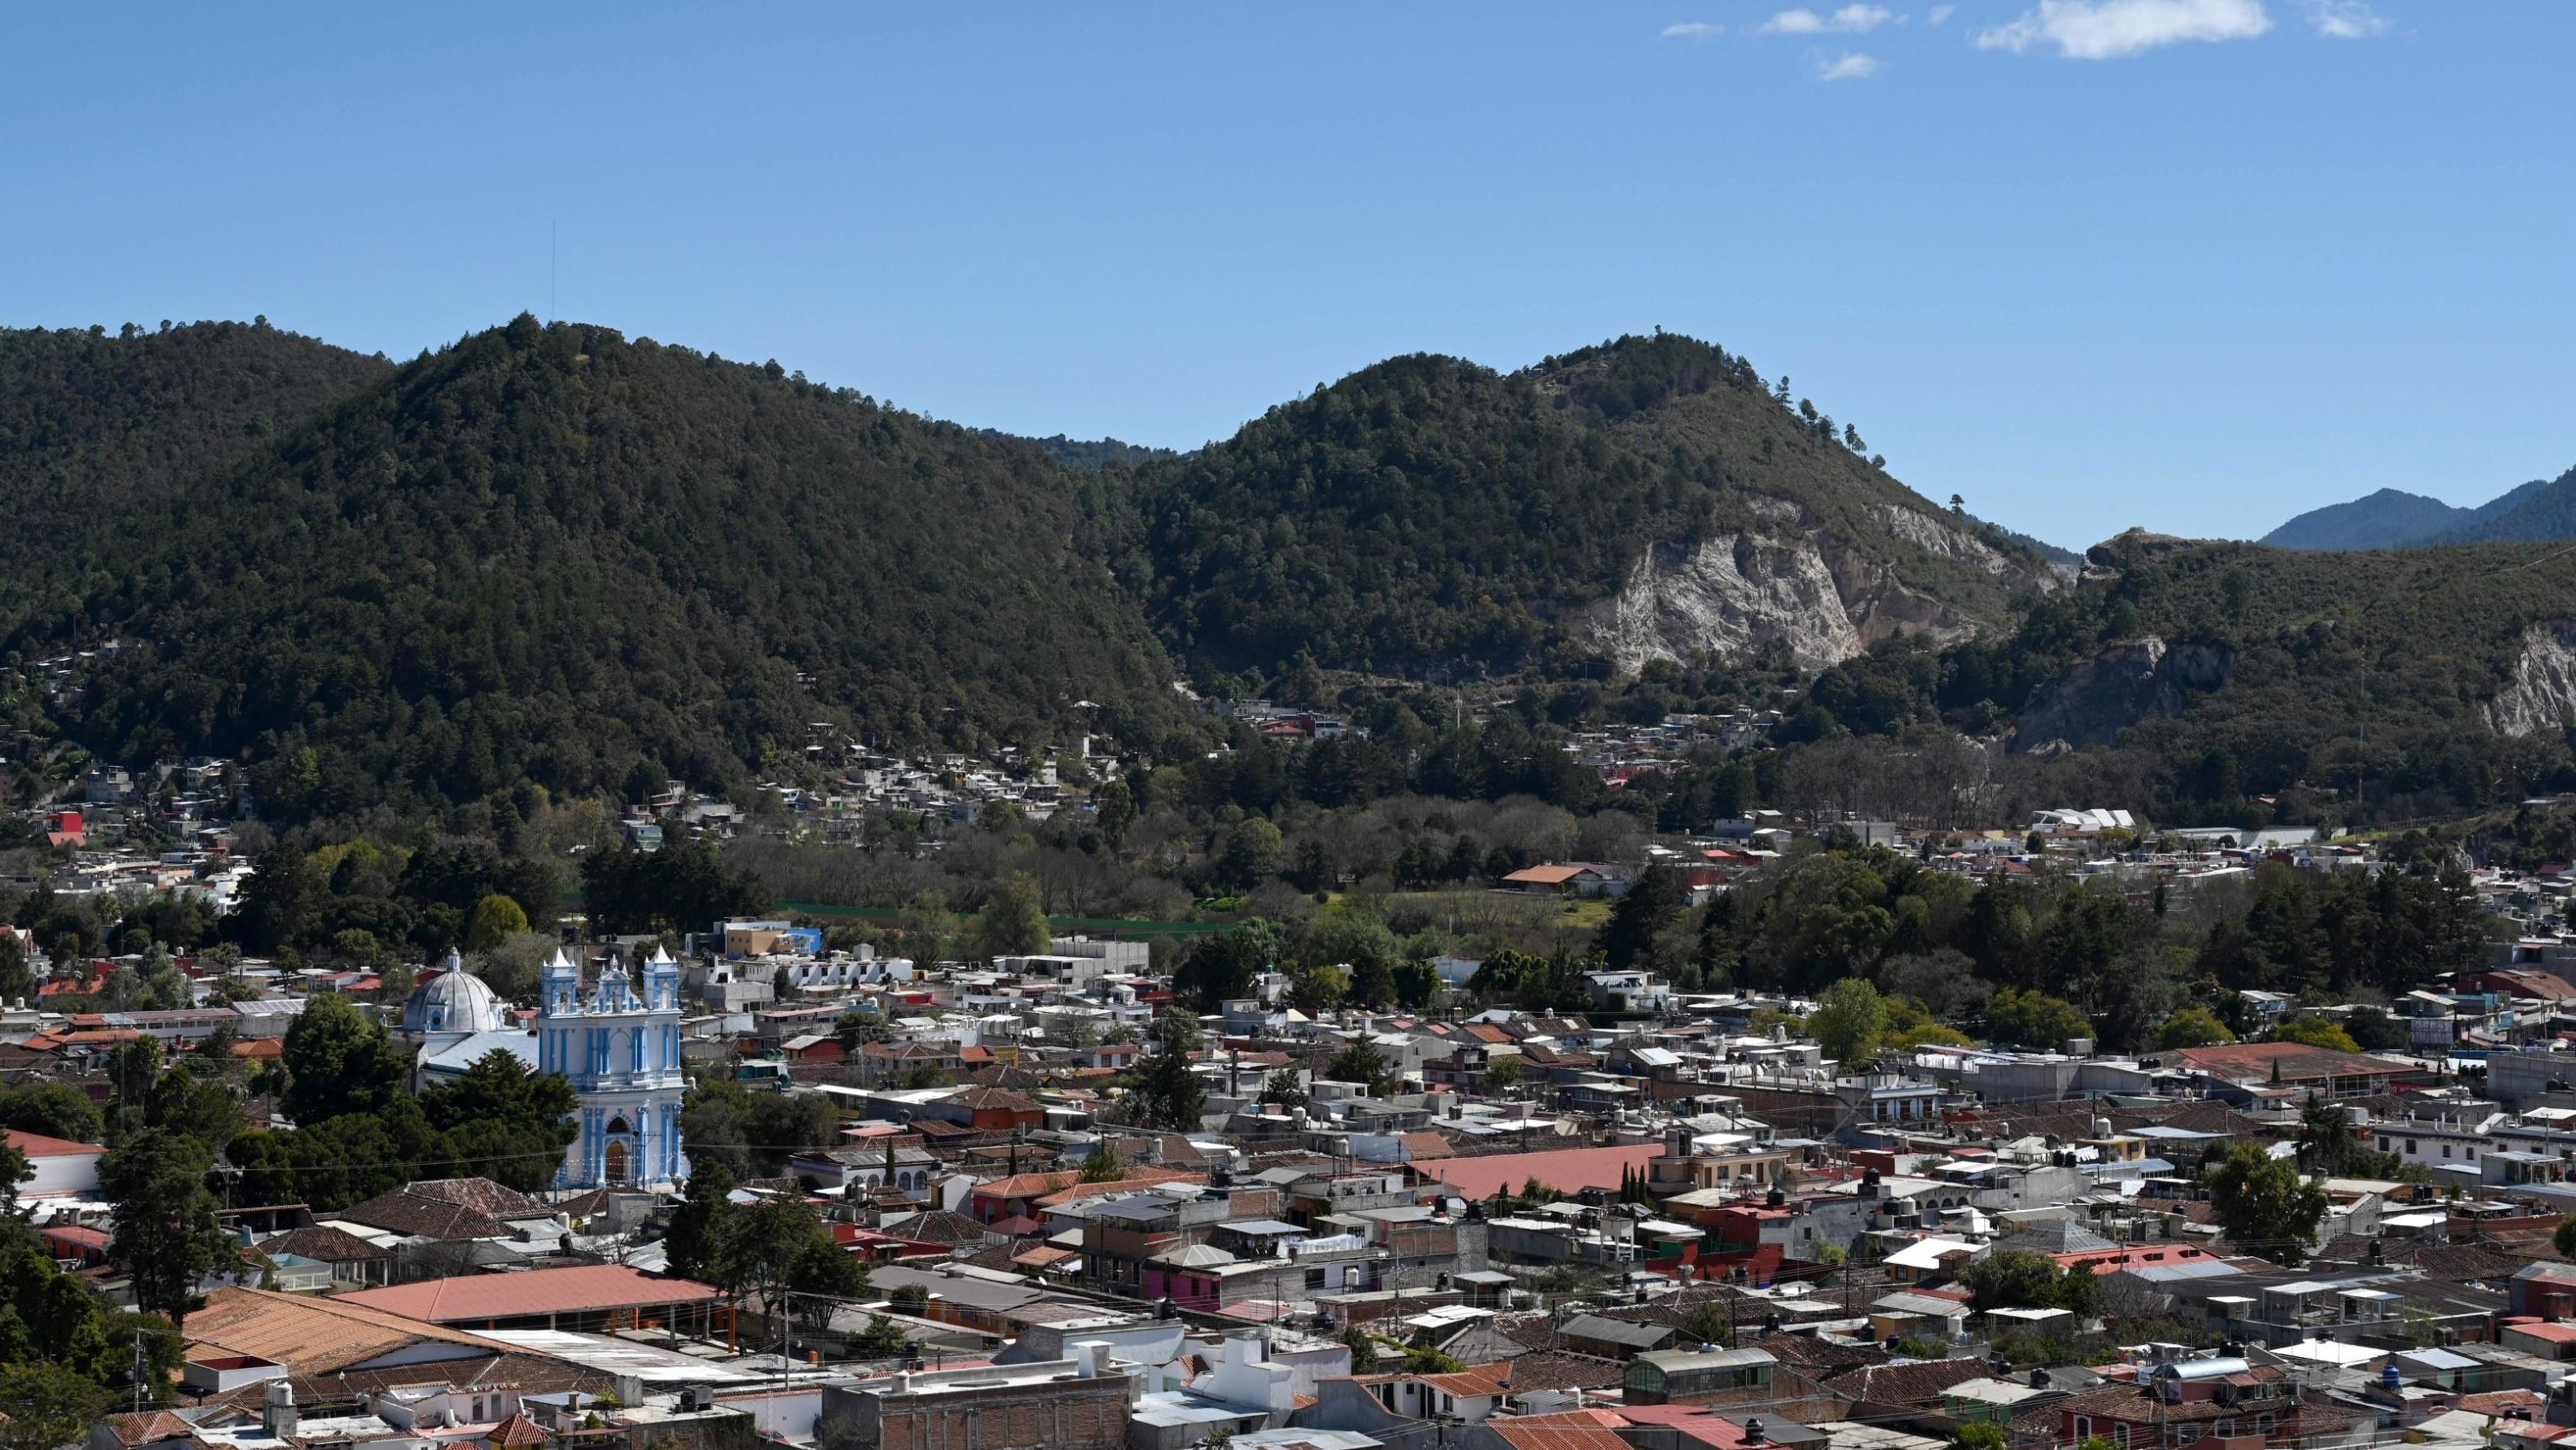 This file photo from January 10, 2020 shows the town of San Cristóbal de Las Casas in Mexico's southern Chiapas state.